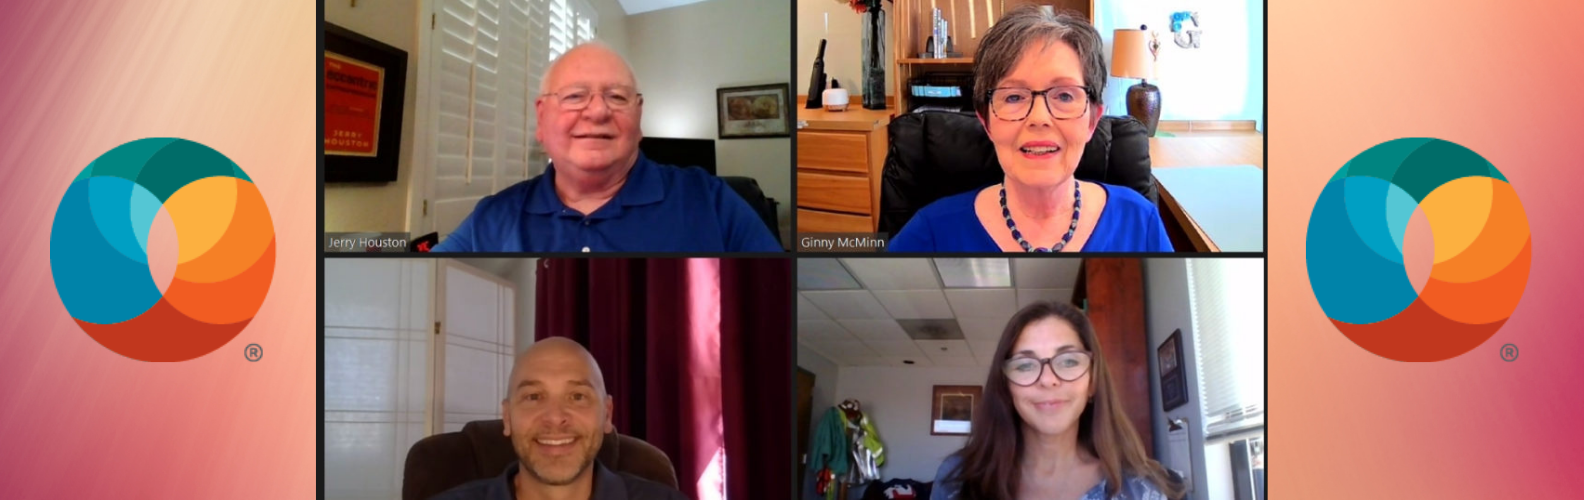 Interview with McMinn HR and HPISolution  – Episode 8 of People + Profit Show